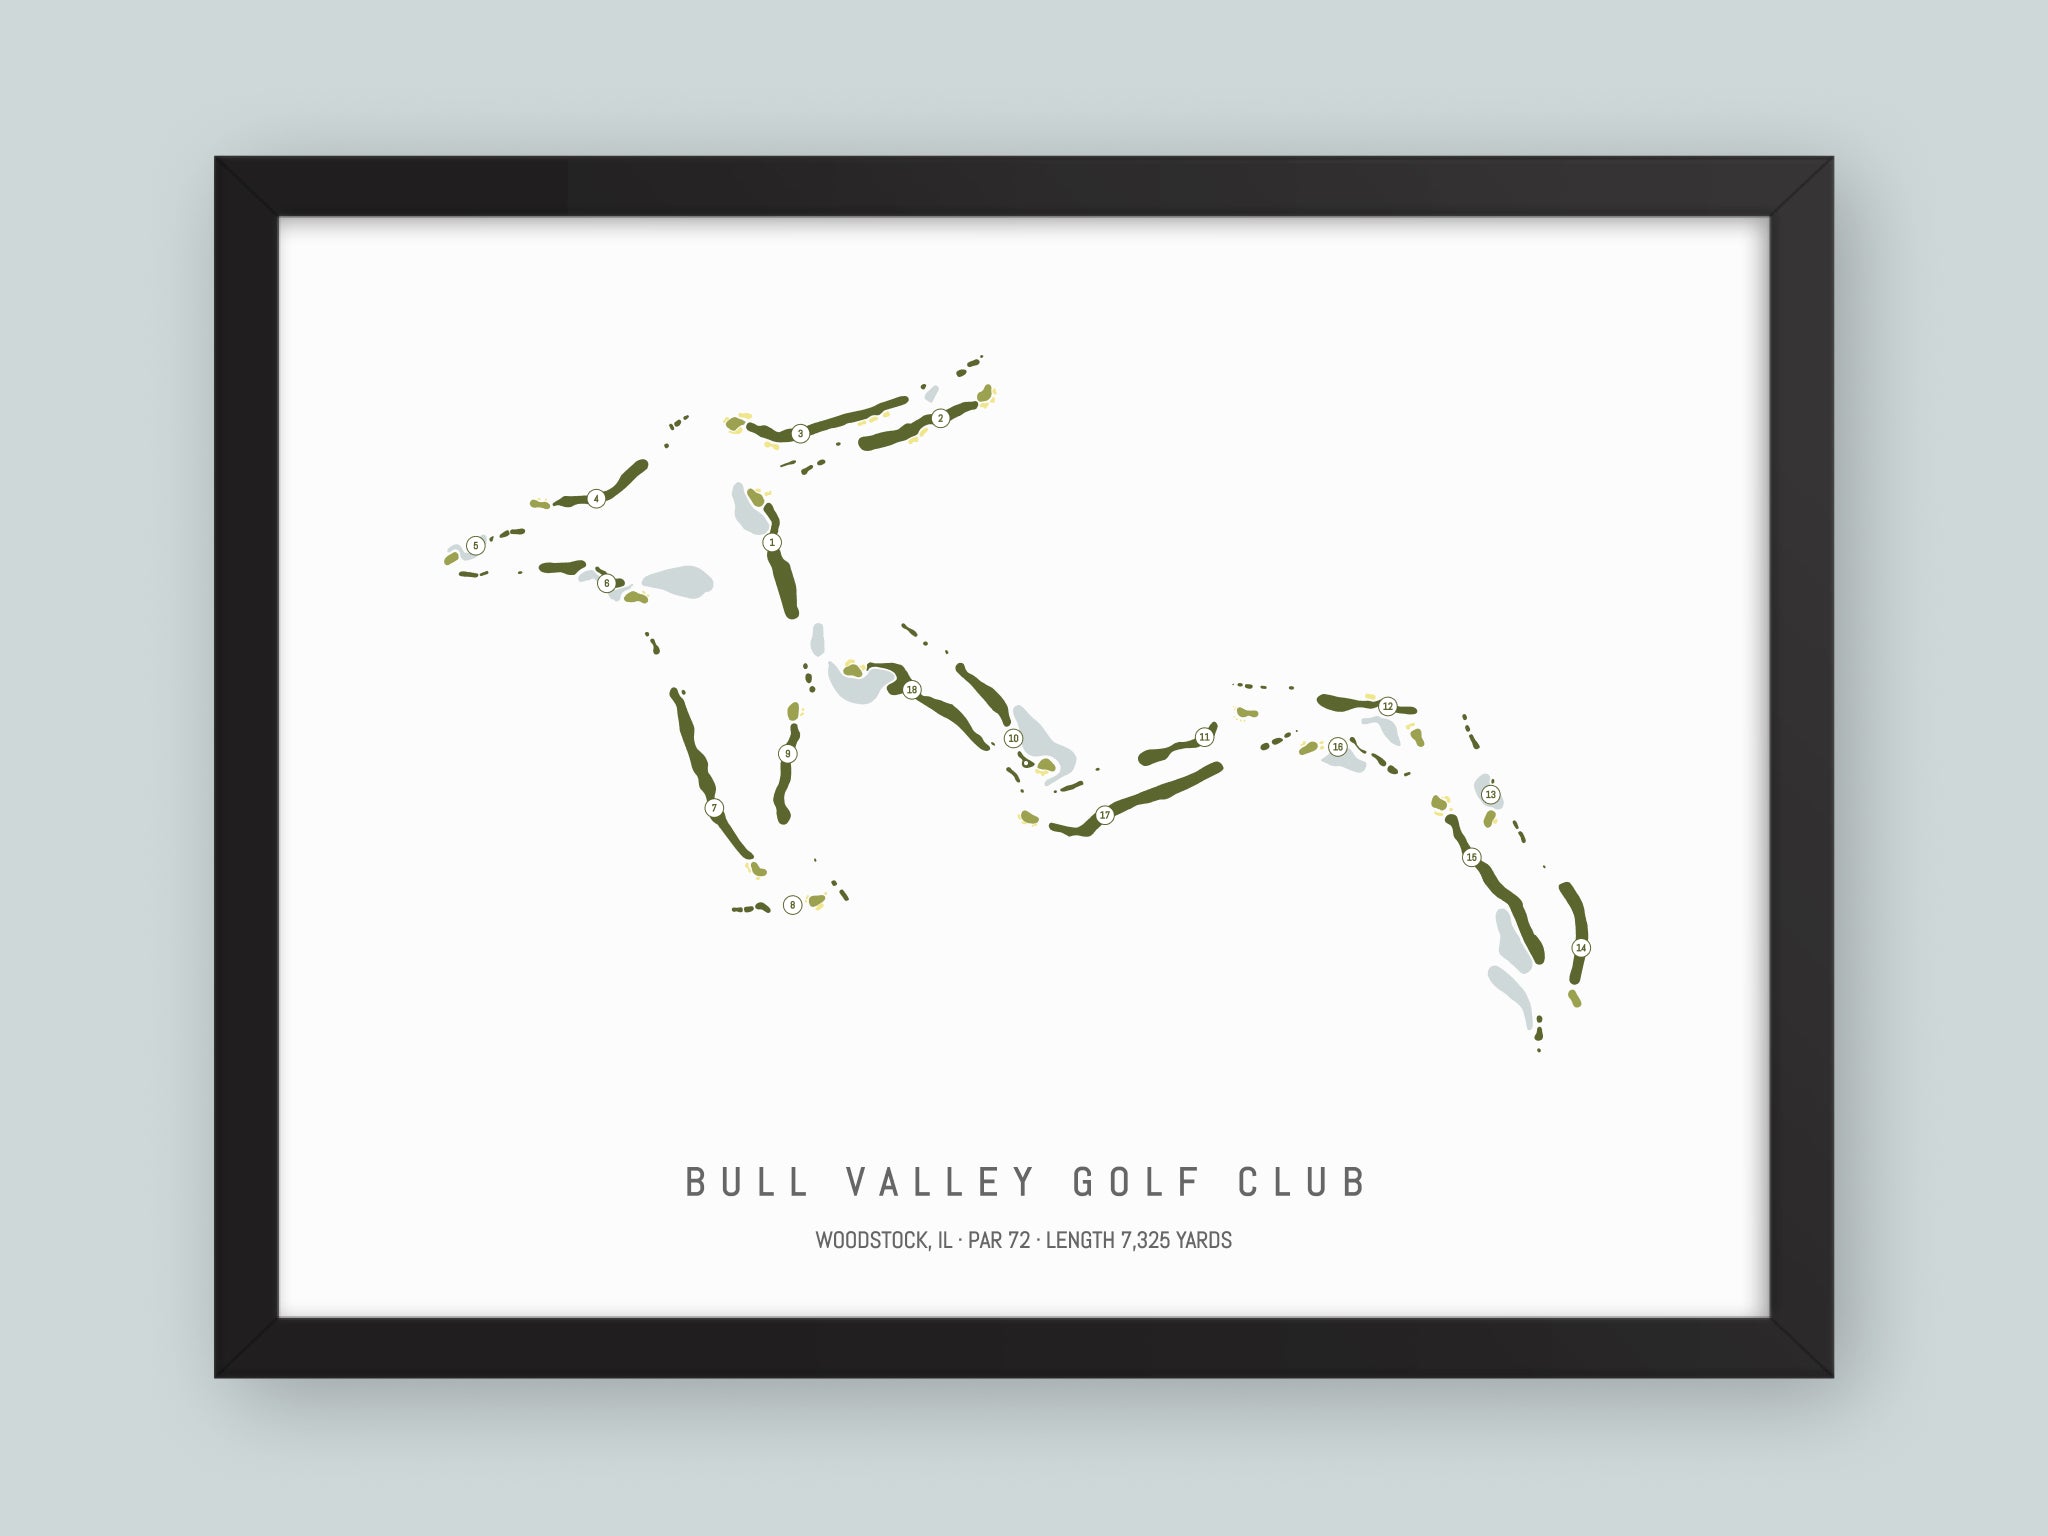 Bull-Valley-Golf-Club-IL--Black-Frame-24x18-With-Hole-Numbers